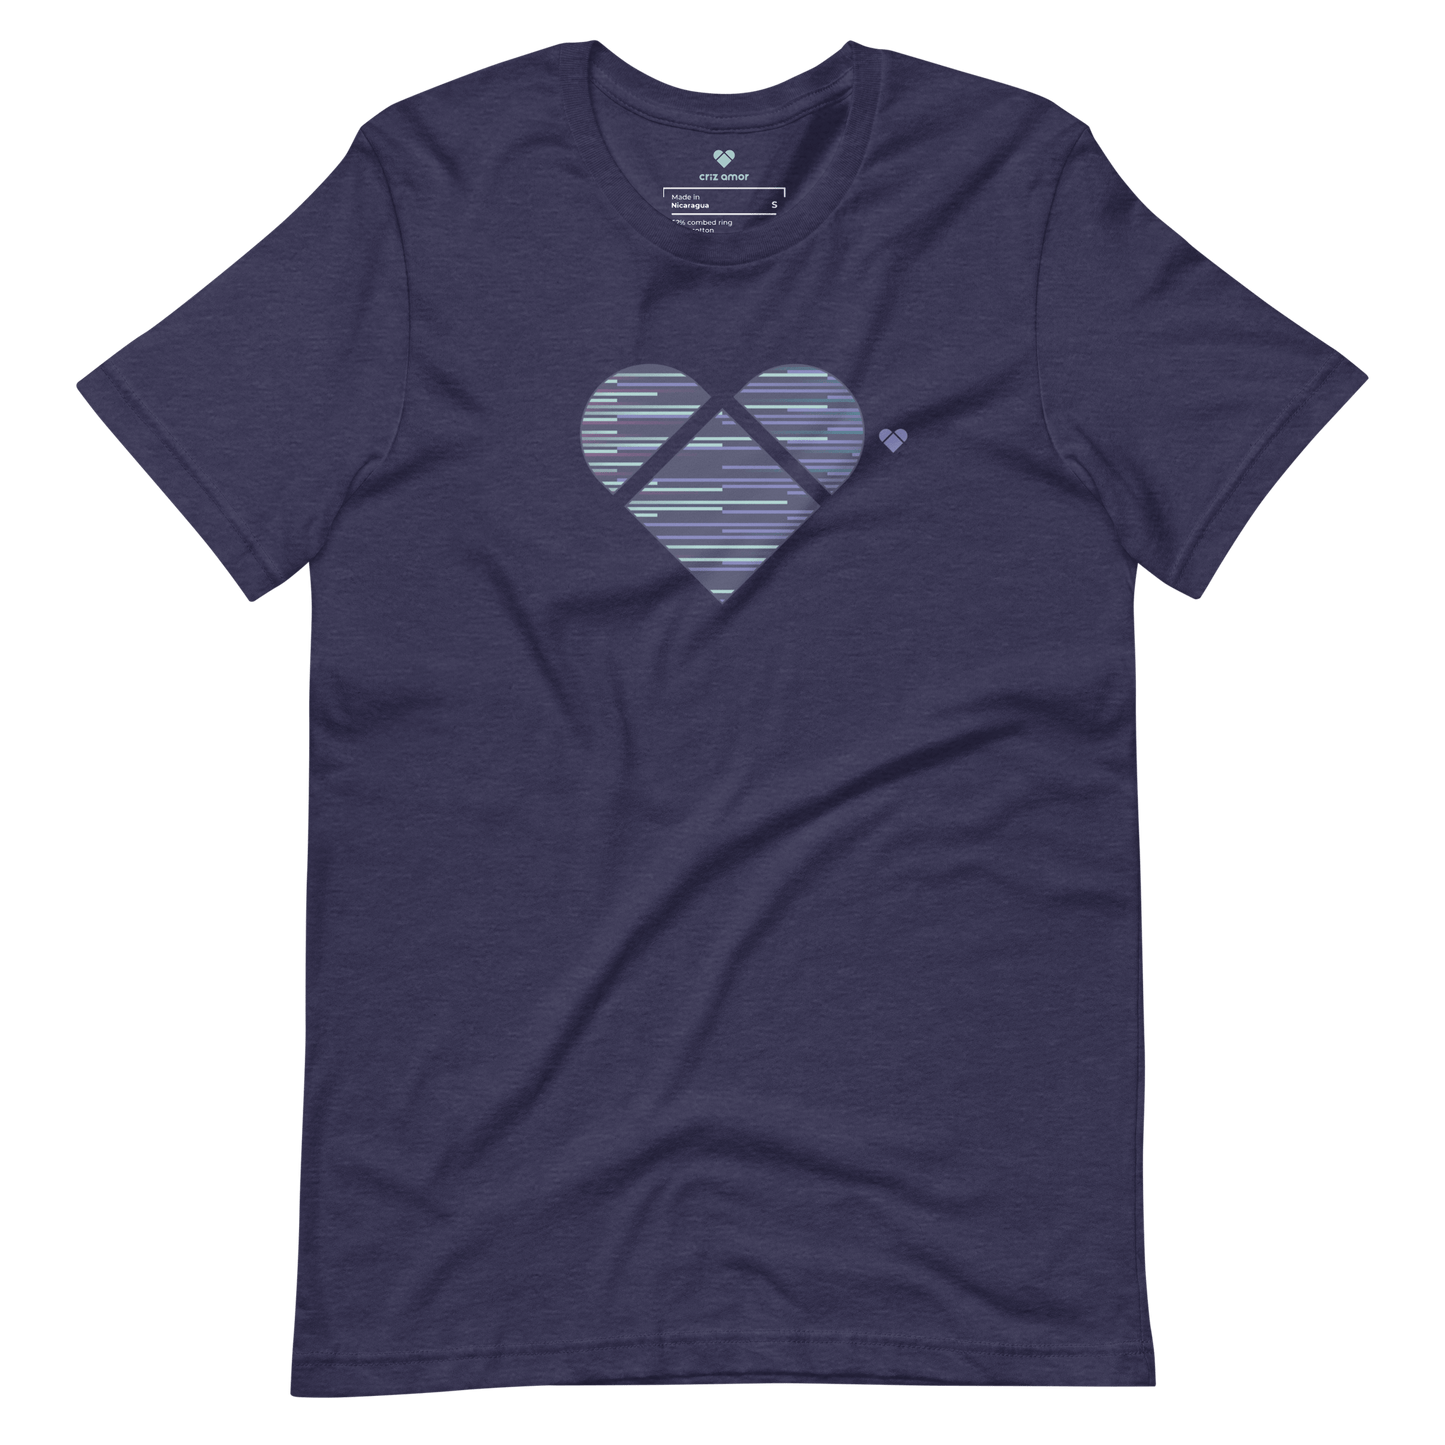 Dark Blue Tee with Slate Blue Heart Logo and Periwinkle Mint Stripes